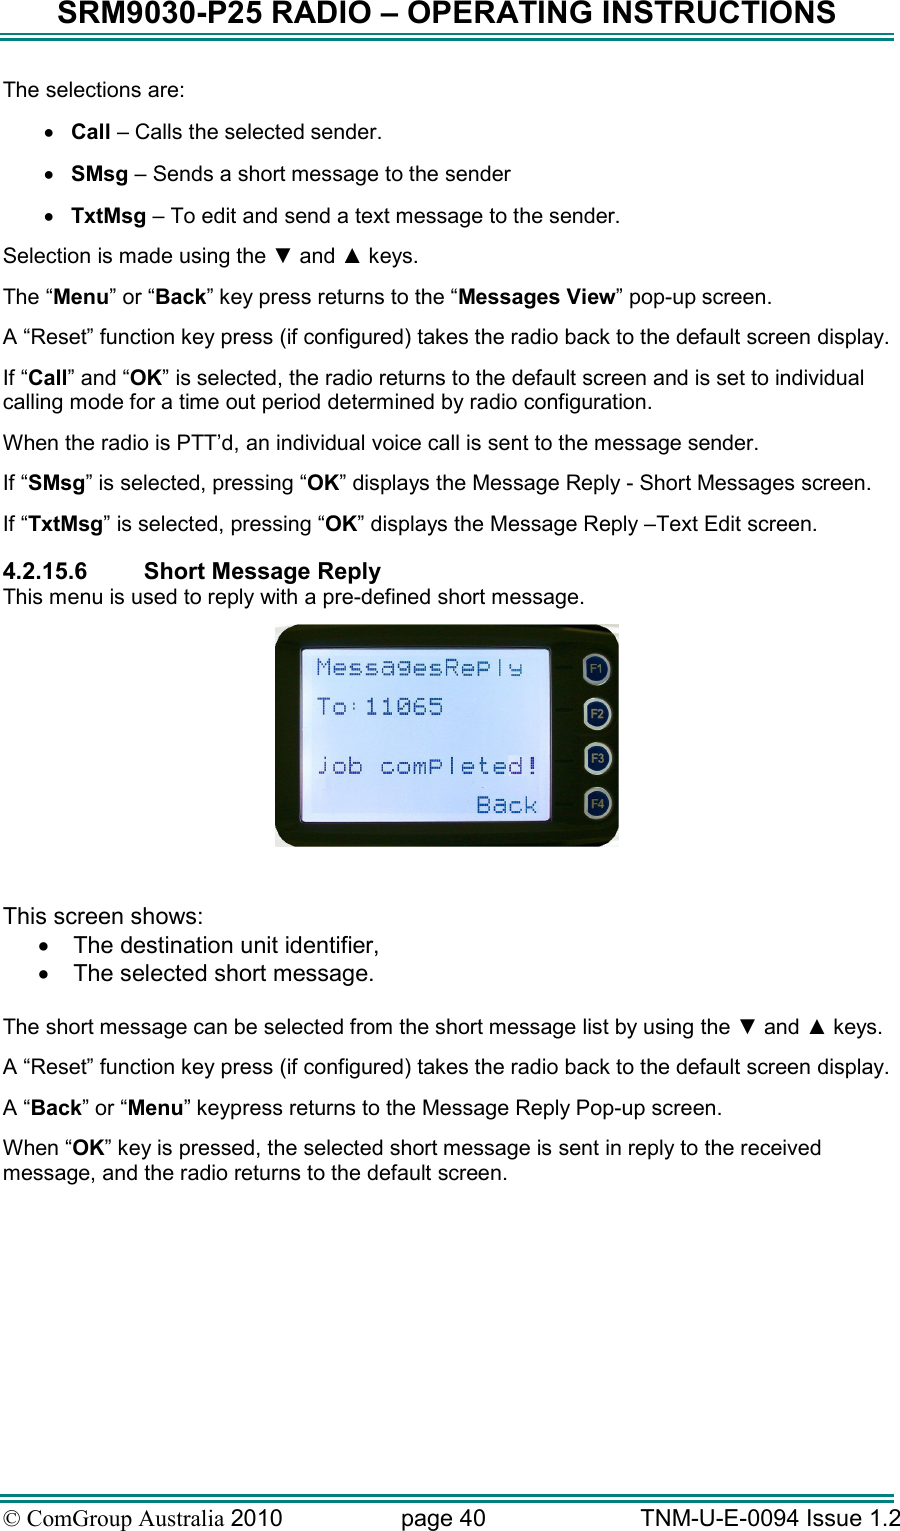 SRM9030-P25 RADIO – OPERATING INSTRUCTIONS © ComGroup Australia 2010  page 40   TNM-U-E-0094 Issue 1.2 The selections are: • Call – Calls the selected sender. • SMsg – Sends a short message to the sender • TxtMsg – To edit and send a text message to the sender. Selection is made using the ▼ and ▲ keys. The “Menu” or “Back” key press returns to the “Messages View” pop-up screen. A “Reset” function key press (if configured) takes the radio back to the default screen display. If “Call” and “OK” is selected, the radio returns to the default screen and is set to individual calling mode for a time out period determined by radio configuration. When the radio is PTT’d, an individual voice call is sent to the message sender. If “SMsg” is selected, pressing “OK” displays the Message Reply - Short Messages screen. If “TxtMsg” is selected, pressing “OK” displays the Message Reply –Text Edit screen. 4.2.15.6  Short Message Reply This menu is used to reply with a pre-defined short message.   This screen shows: •  The destination unit identifier, •  The selected short message.  The short message can be selected from the short message list by using the ▼ and ▲ keys. A “Reset” function key press (if configured) takes the radio back to the default screen display. A “Back” or “Menu” keypress returns to the Message Reply Pop-up screen. When “OK” key is pressed, the selected short message is sent in reply to the received message, and the radio returns to the default screen. 